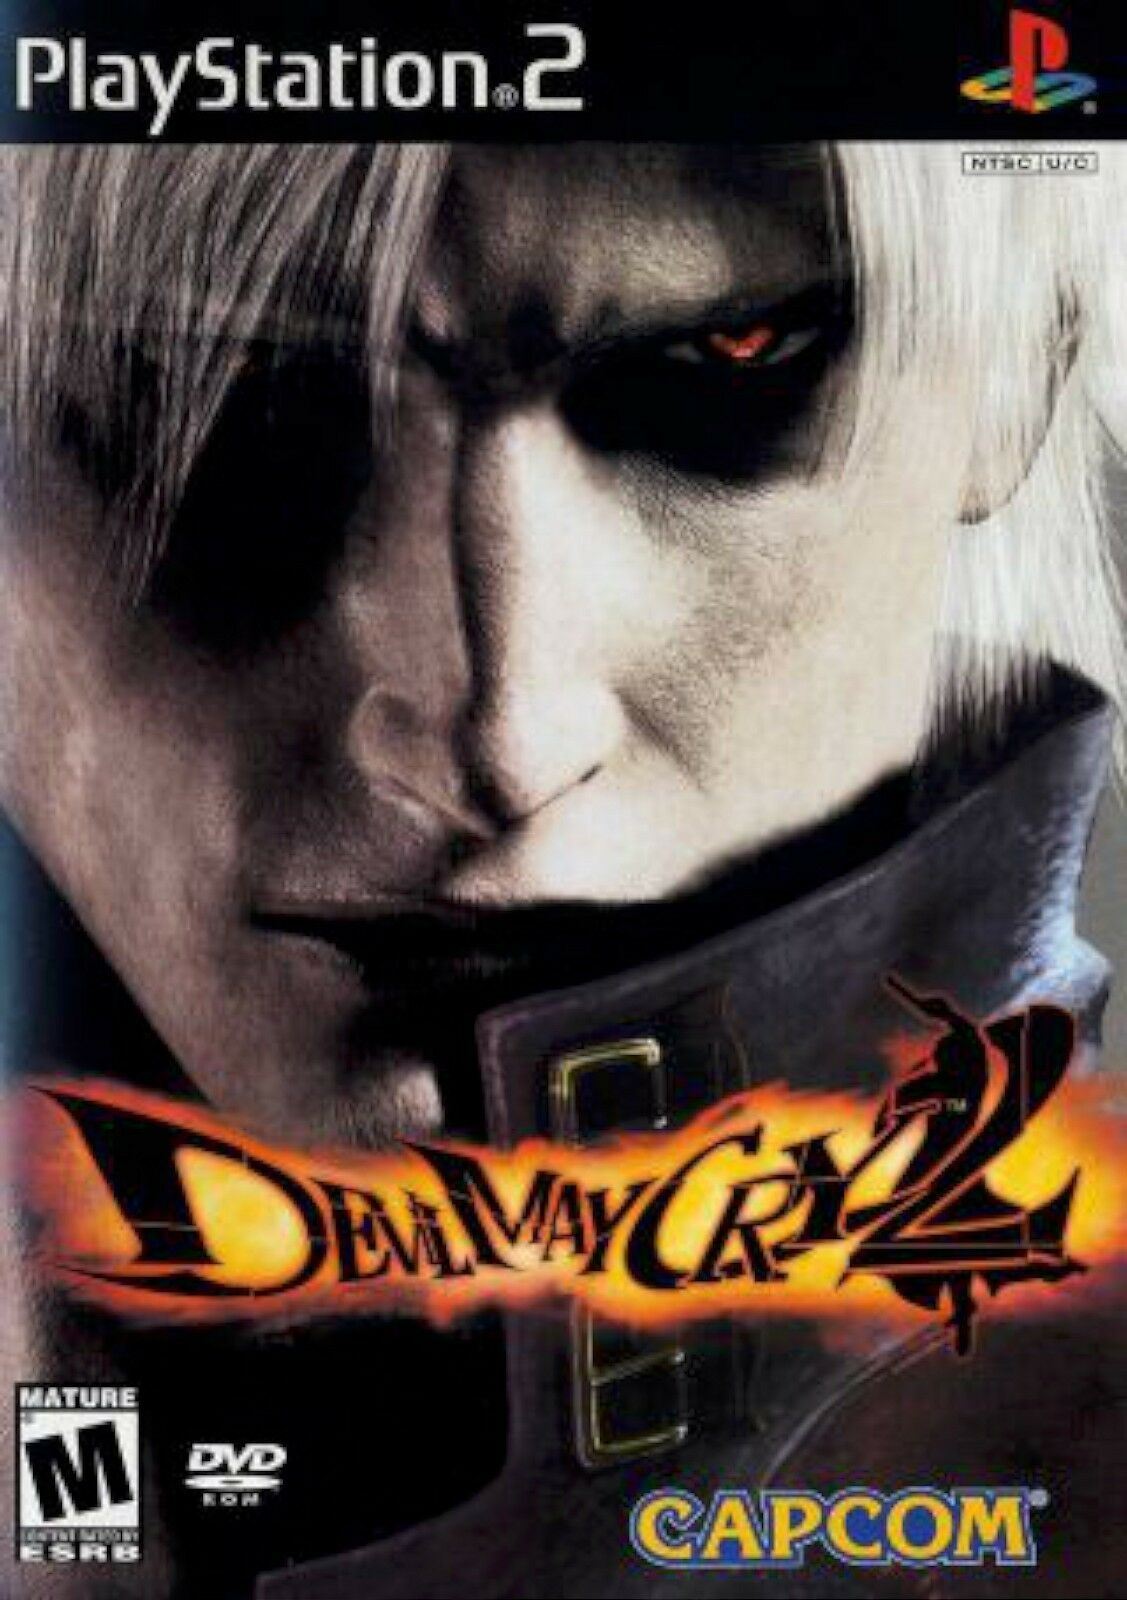 PS2 Devil May Cry 2 Video Game two capcom action adventure COMPLETE [Used/Refurbished]